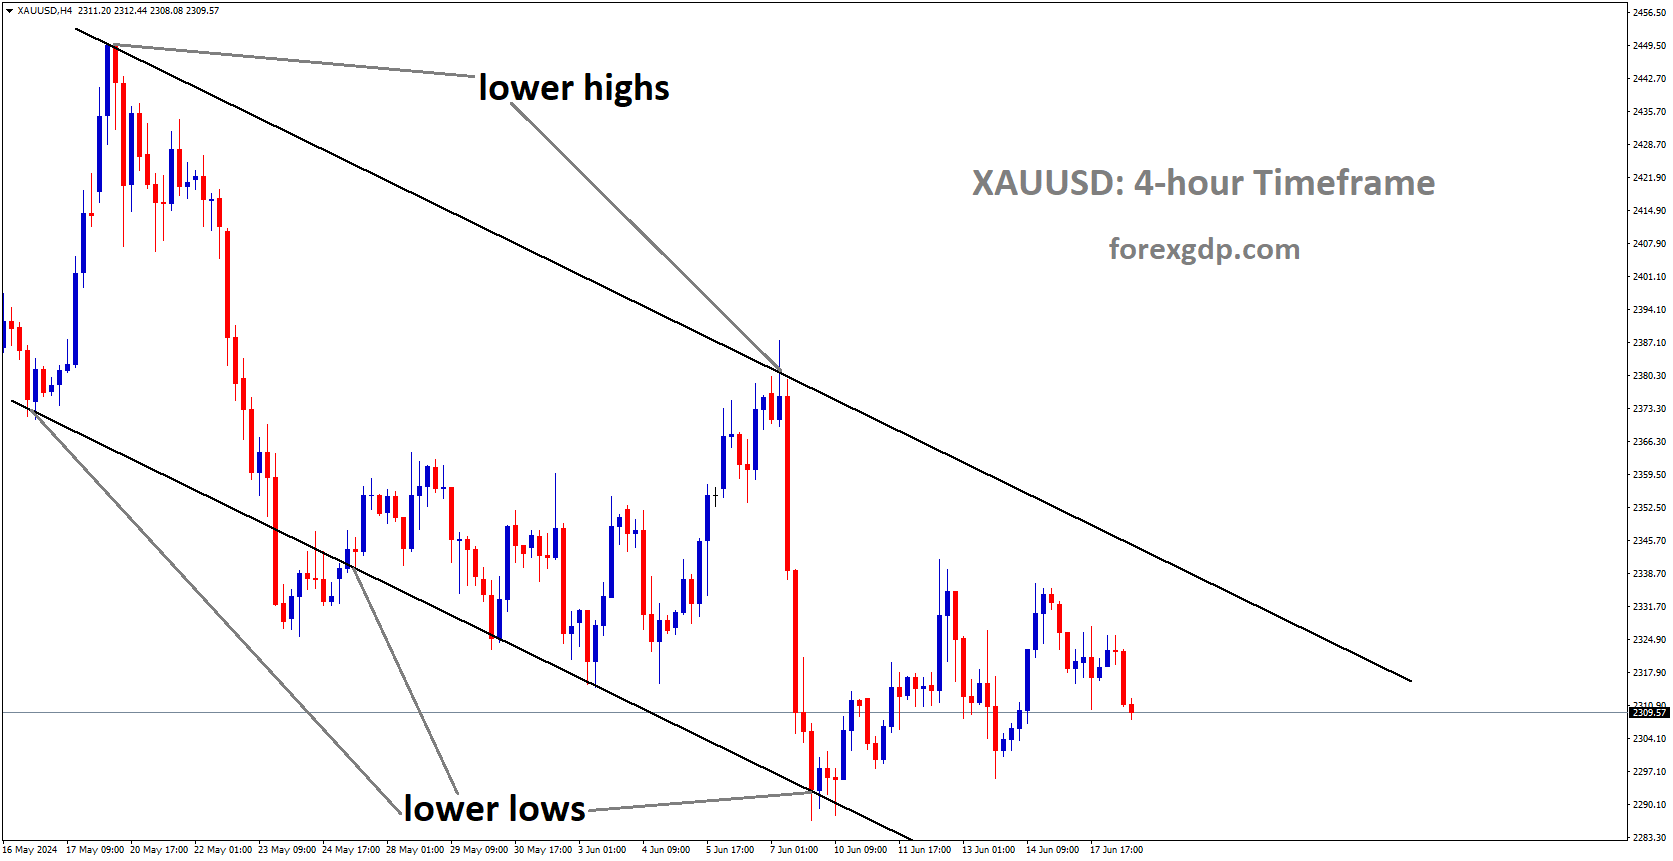 XAUUSD is moving in Descending channel and market has rebounded from the lower low area of the channel